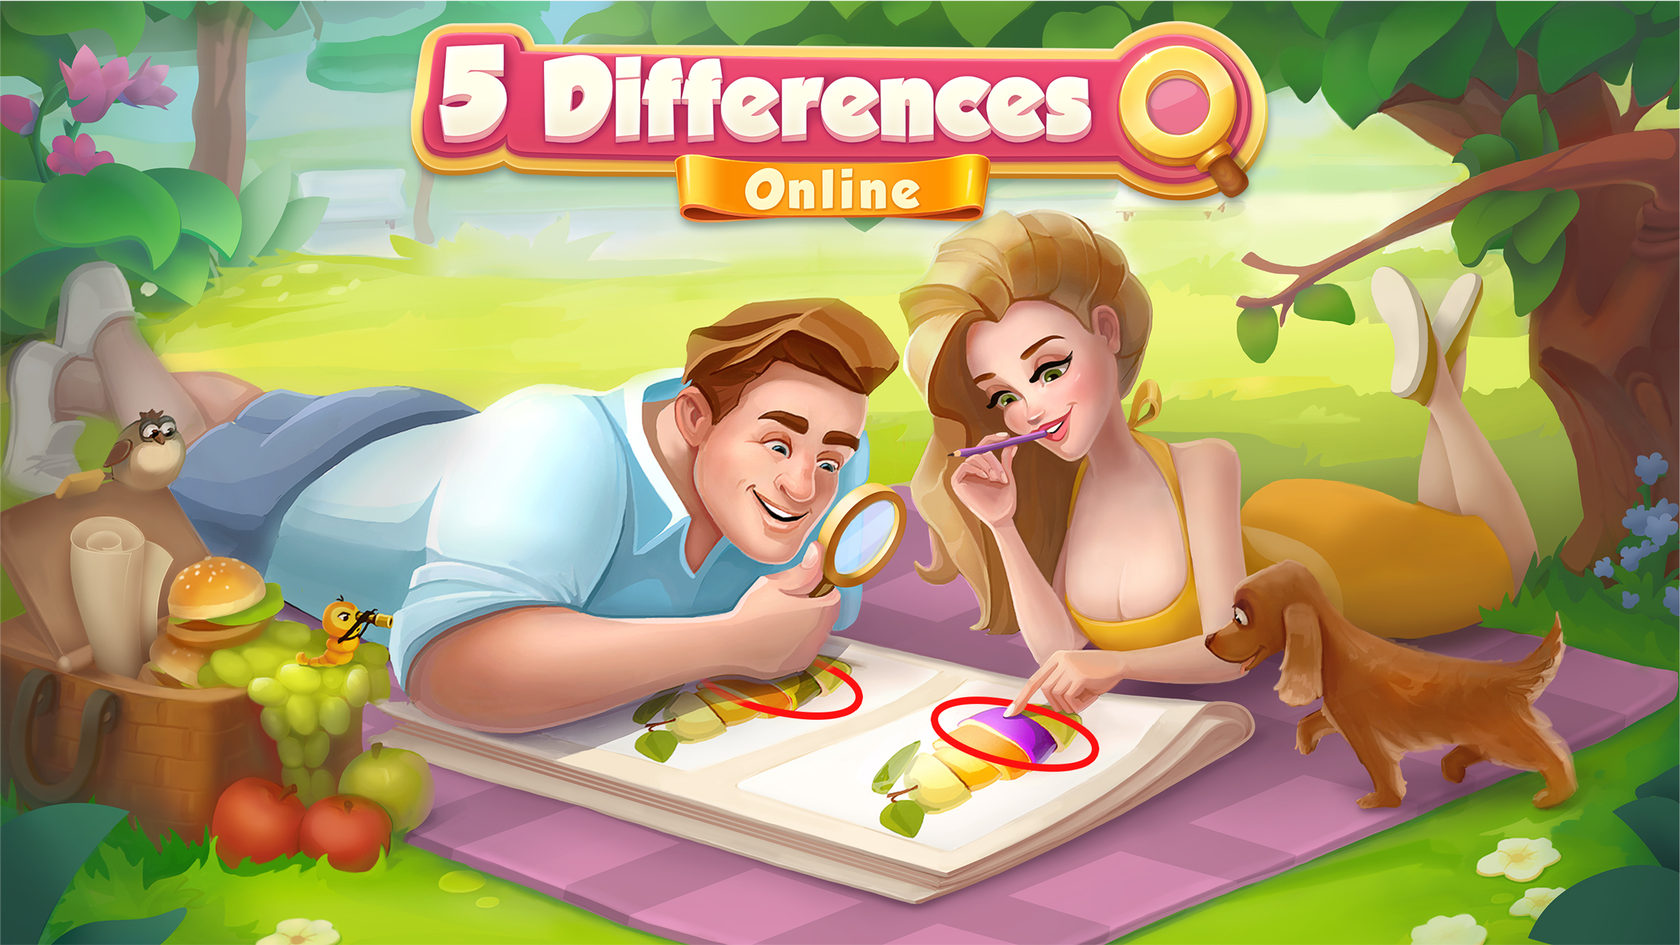 on the game 5 differences online level 37 pick 3